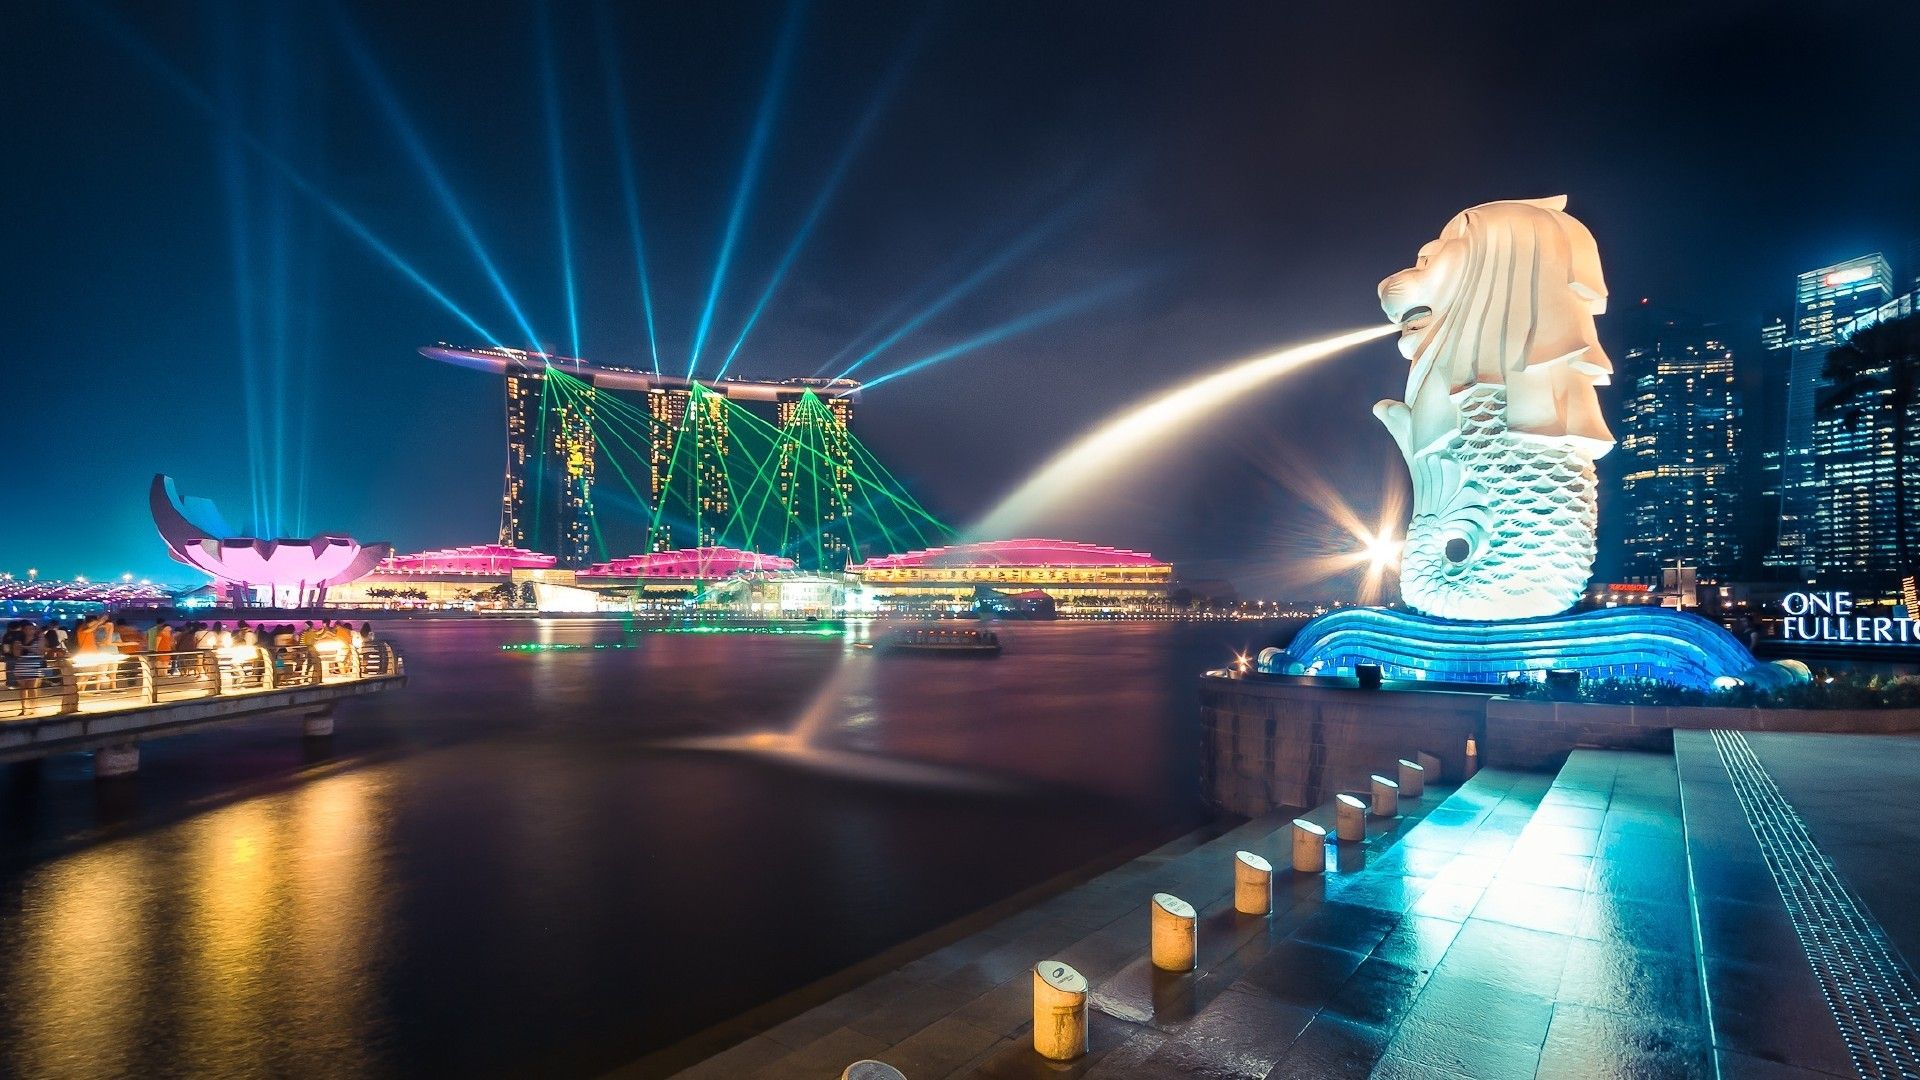 singapore malaysia tour package with flight